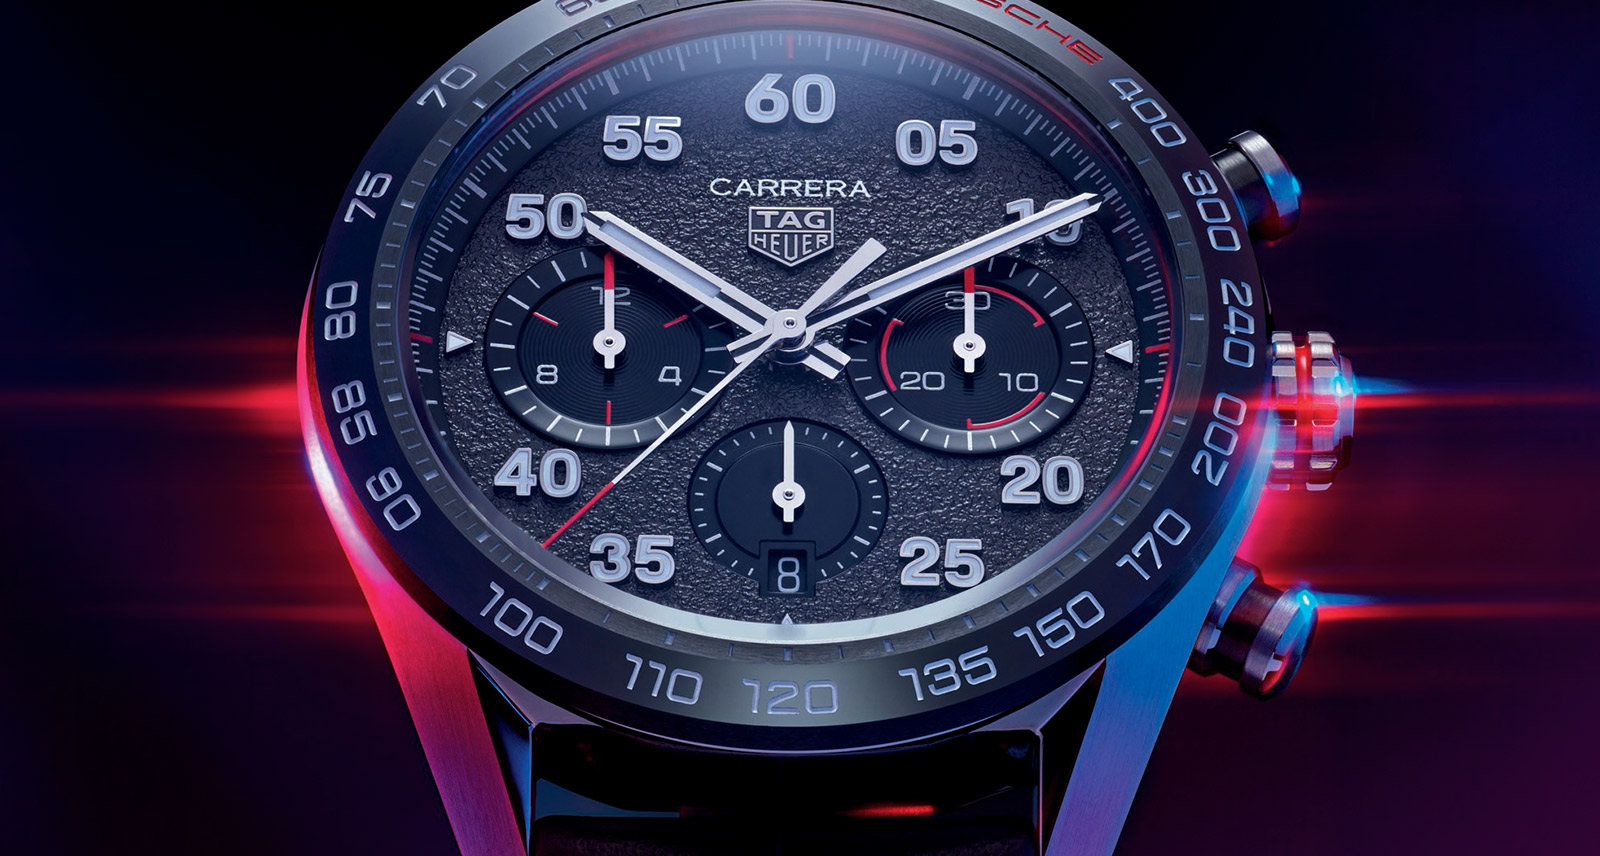 Porsche and Tag Heuer team up for a historic collaboration with the Tag Carrera.